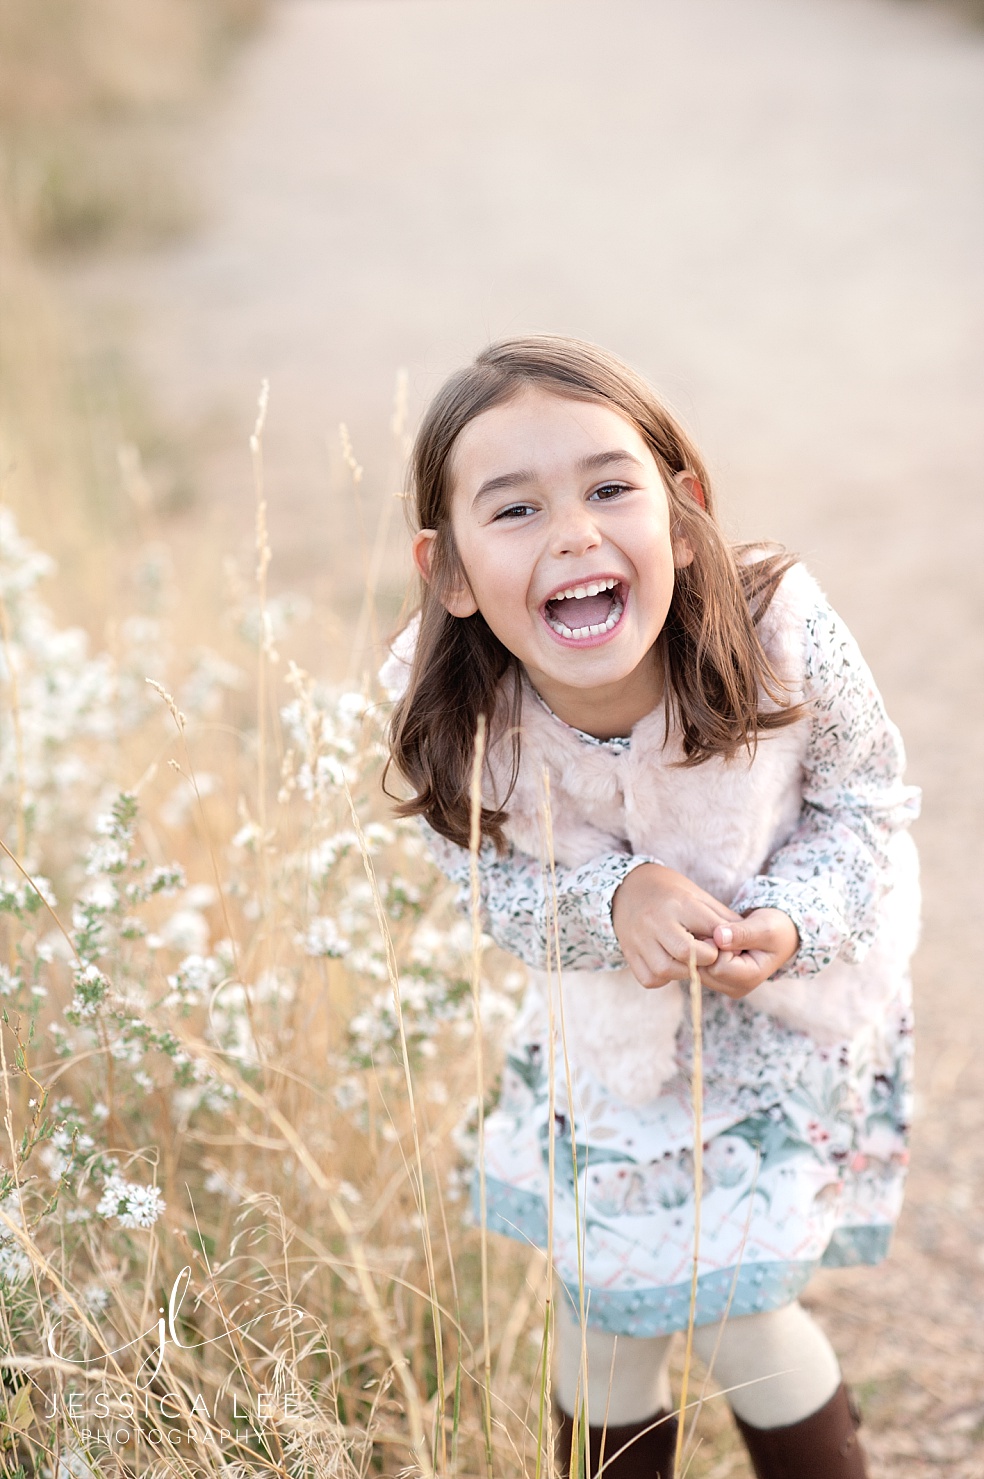 Broomfield Colorado Family Photographer, girl giggling in grass